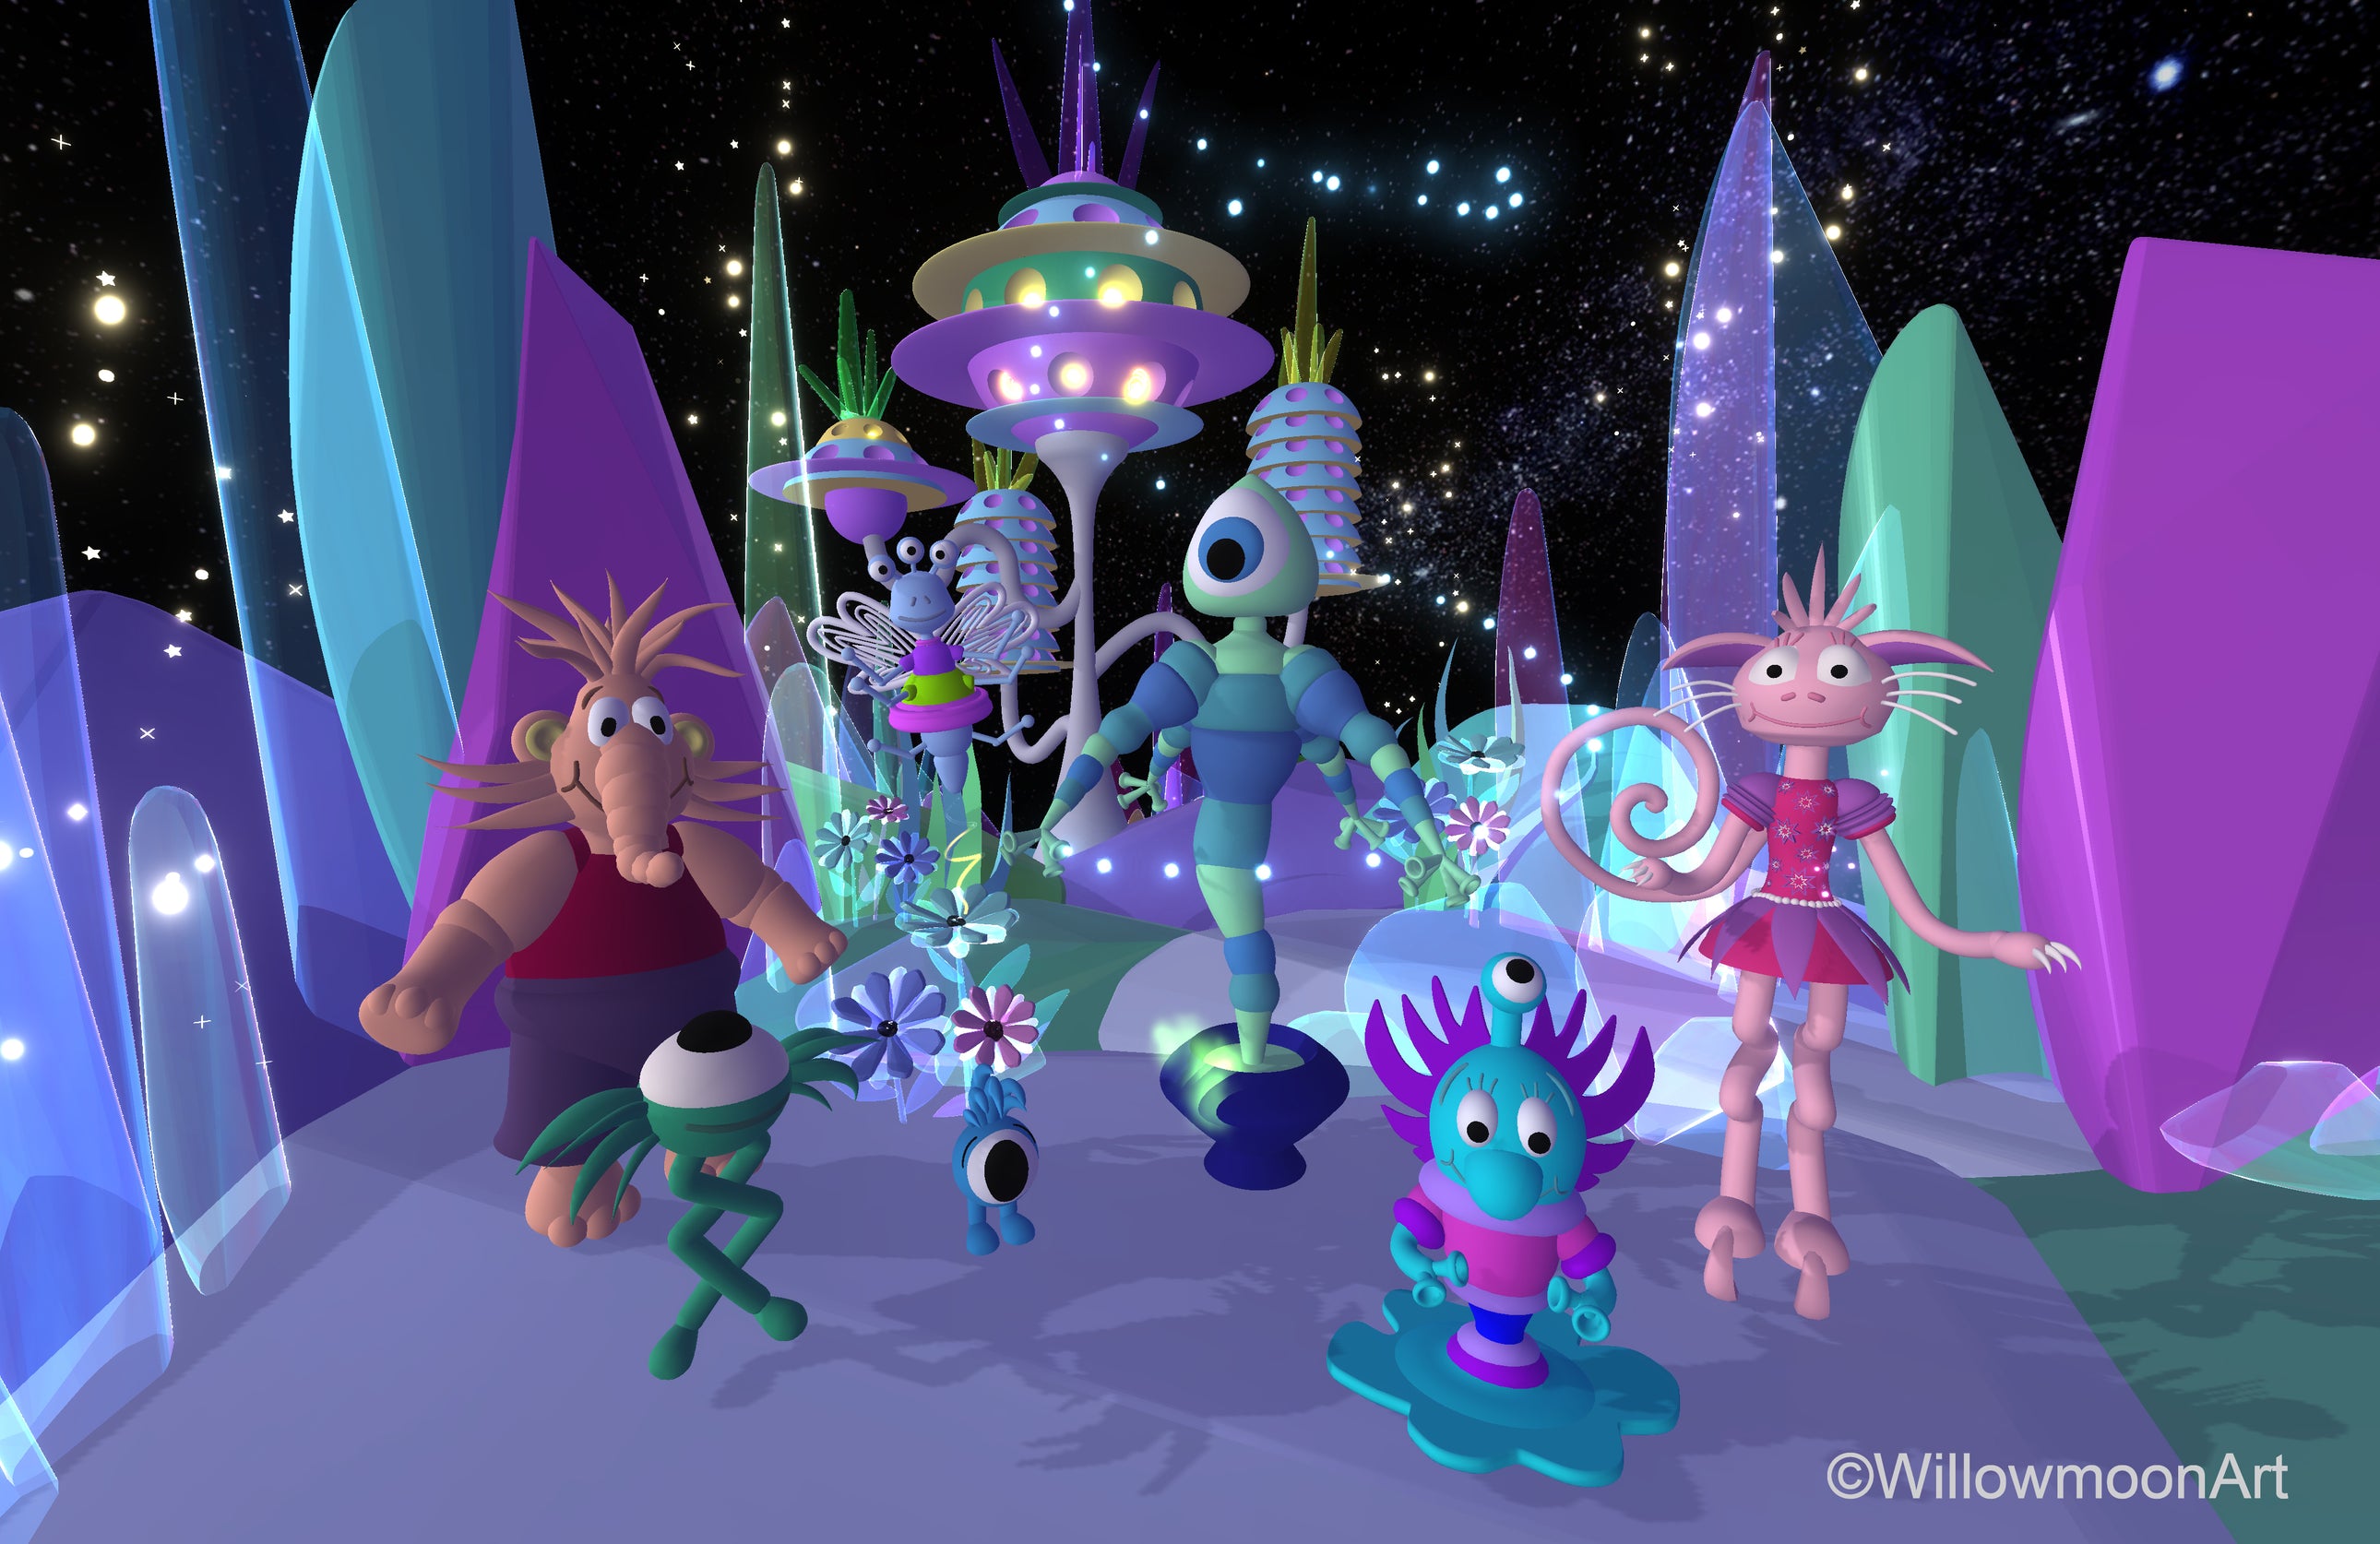 Intergalactic Figure Skating Club Aliens by Willowmoon Art - Created in Virtual Reality with Gravity Sketch and Tiltbrush